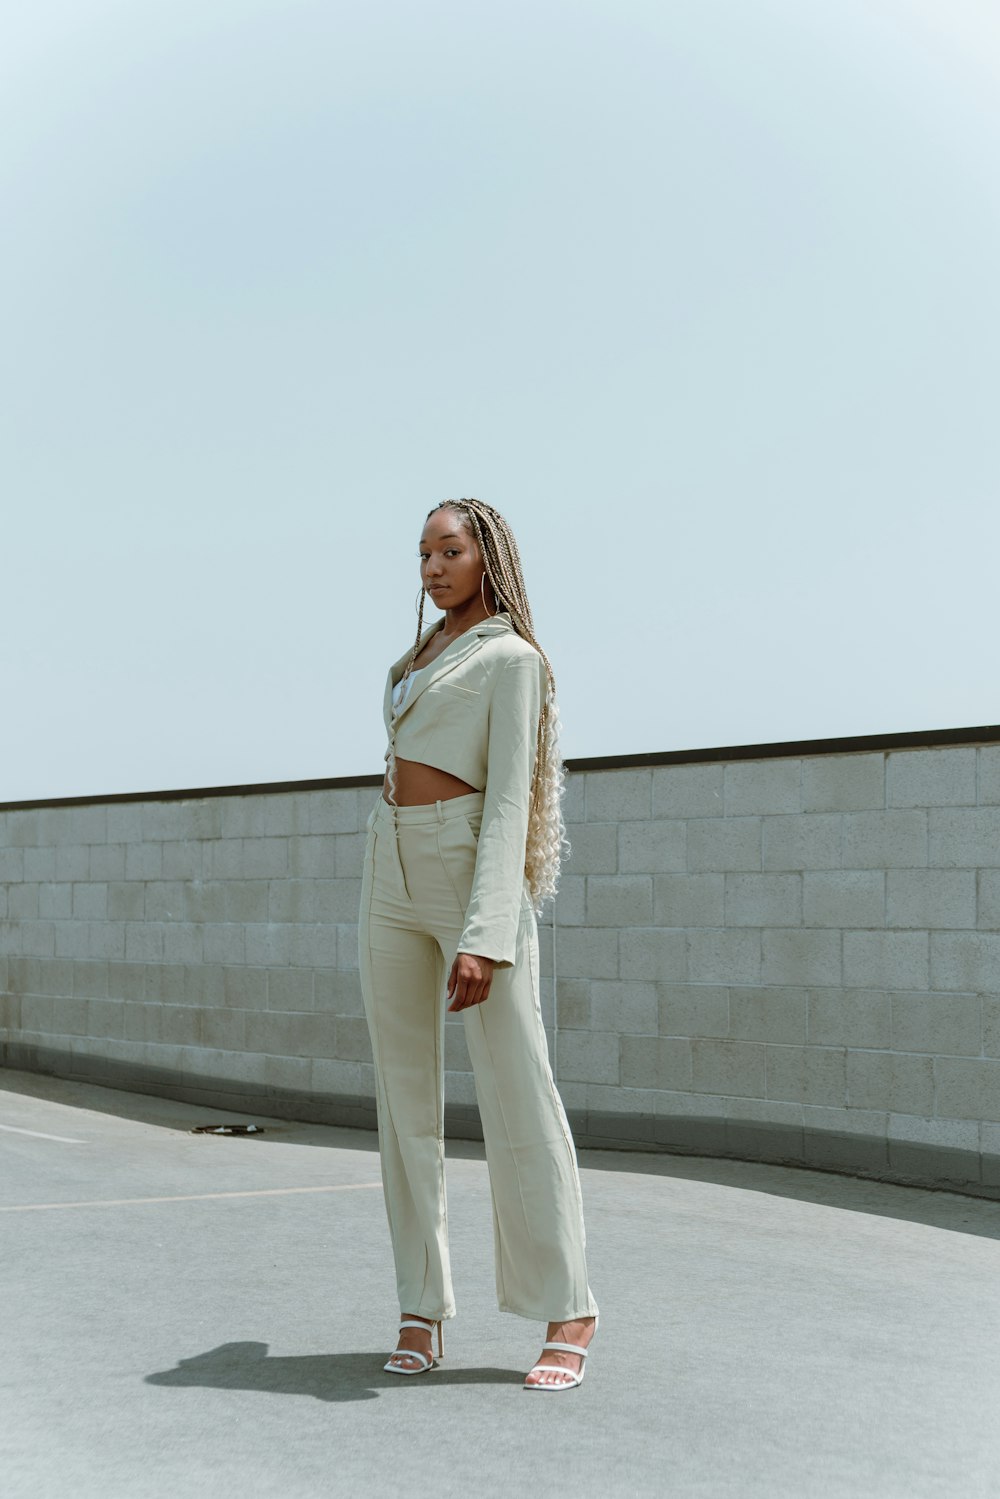 woman in white long sleeve shirt and white pants standing on white concrete floor